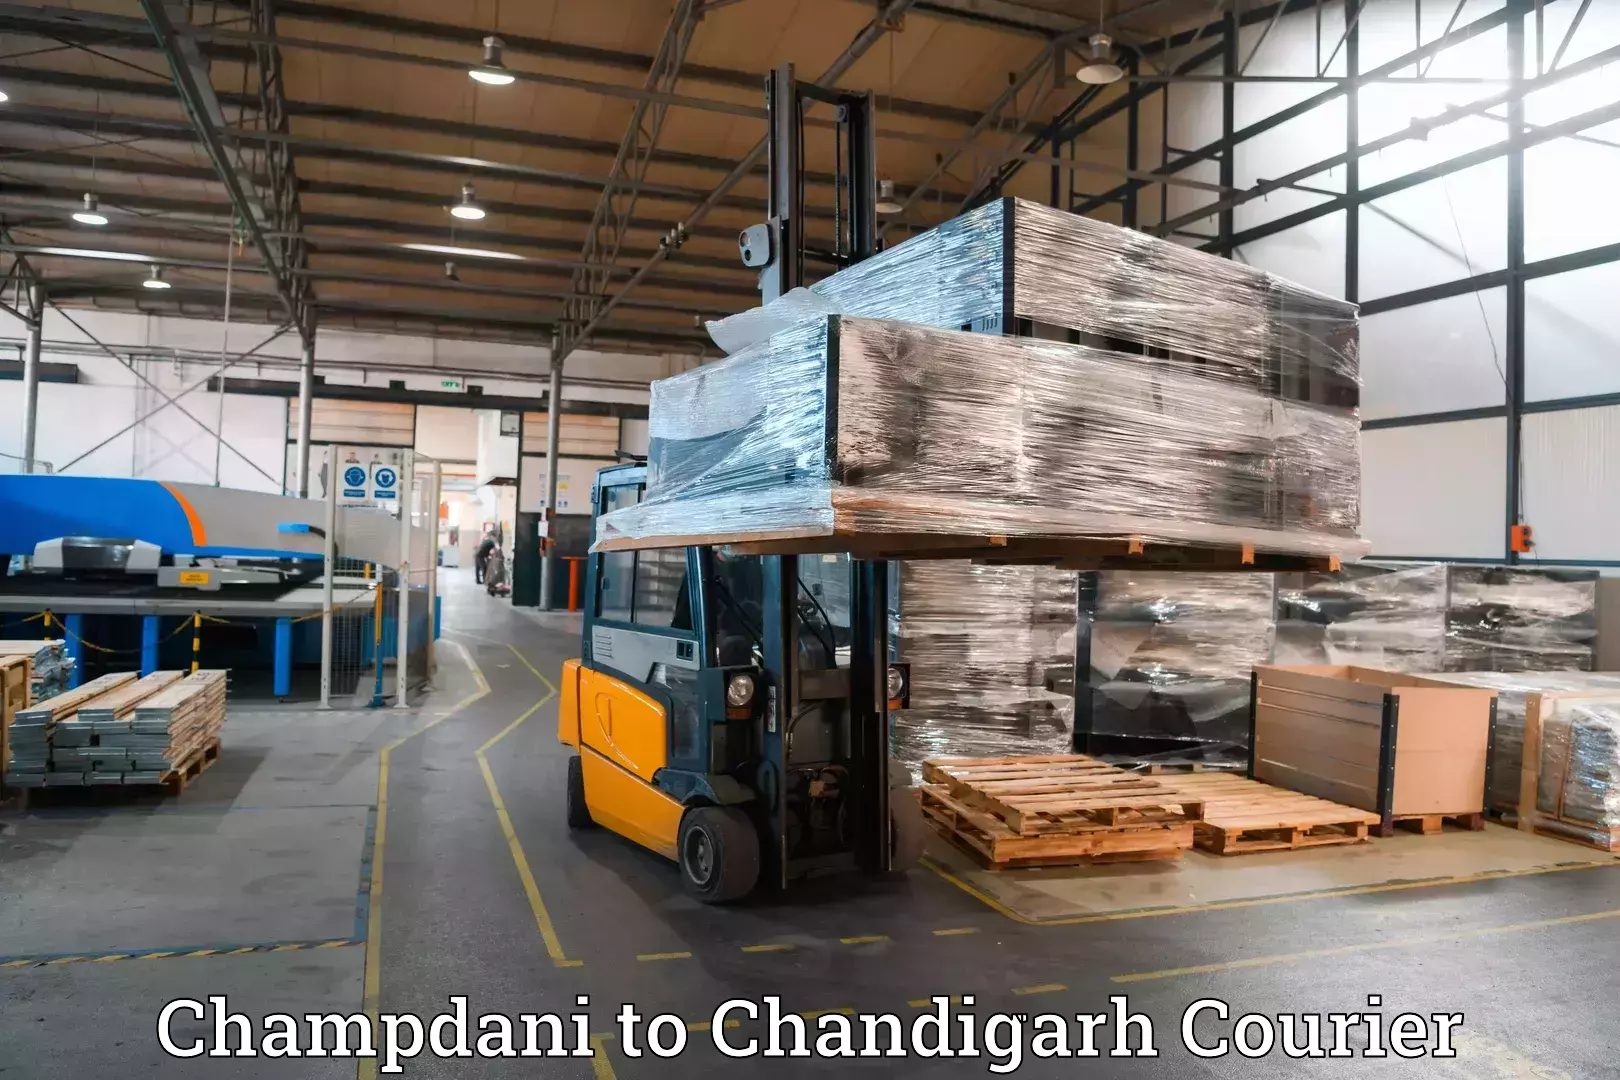 Instant baggage transport quote Champdani to Chandigarh